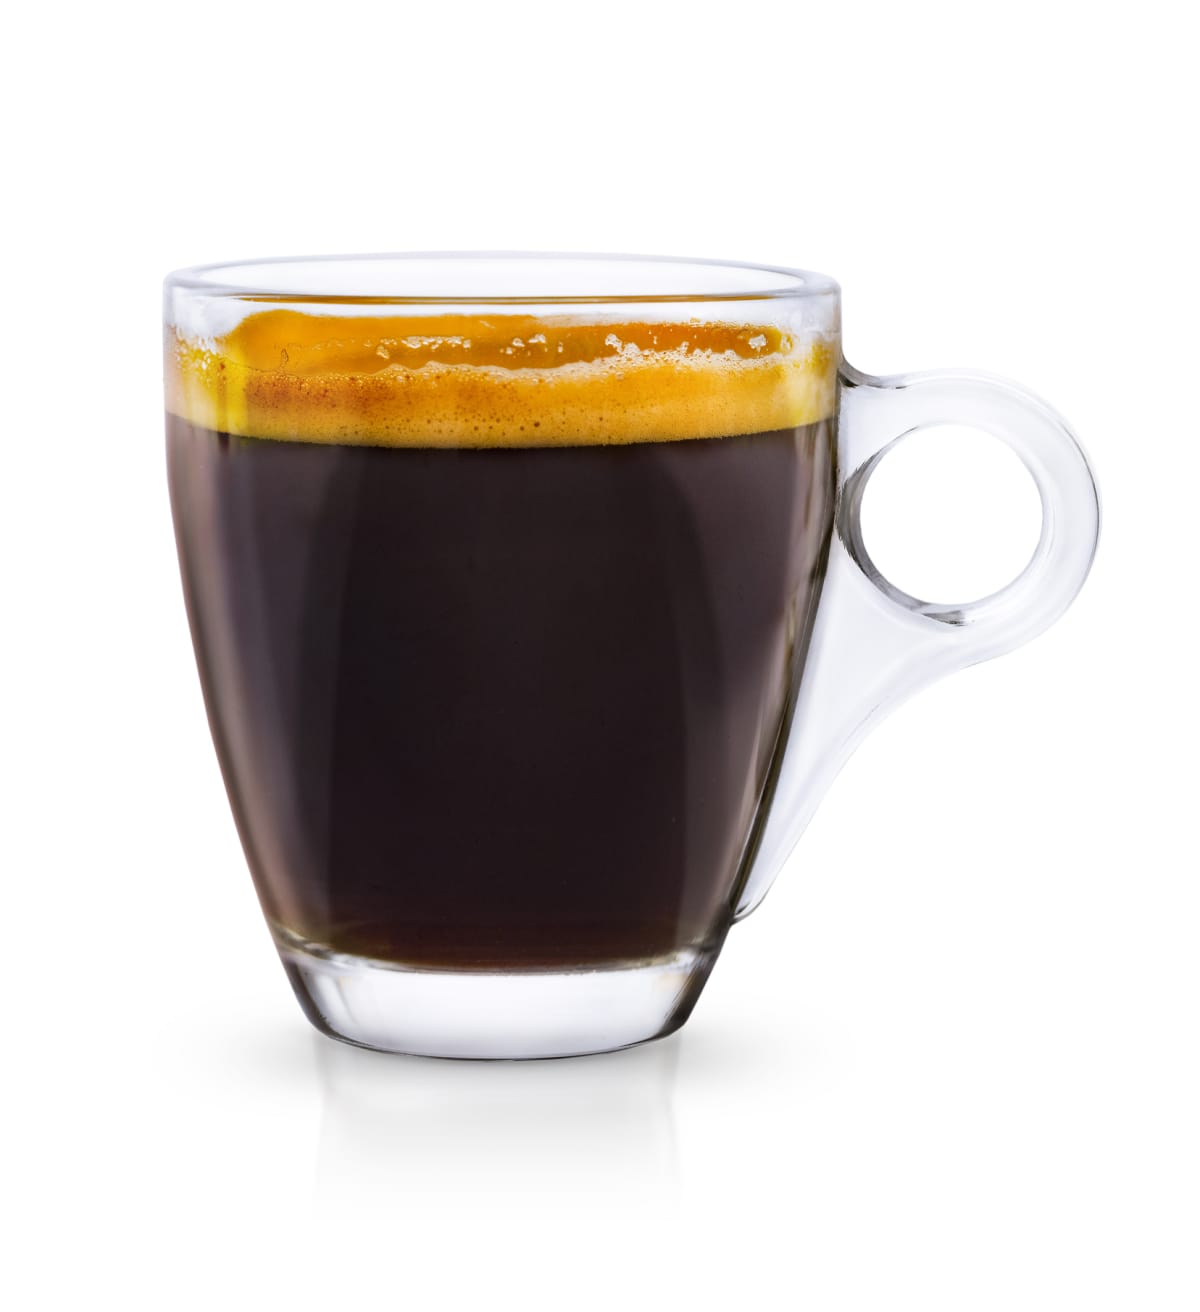 cup of coffee in a clear glass mug